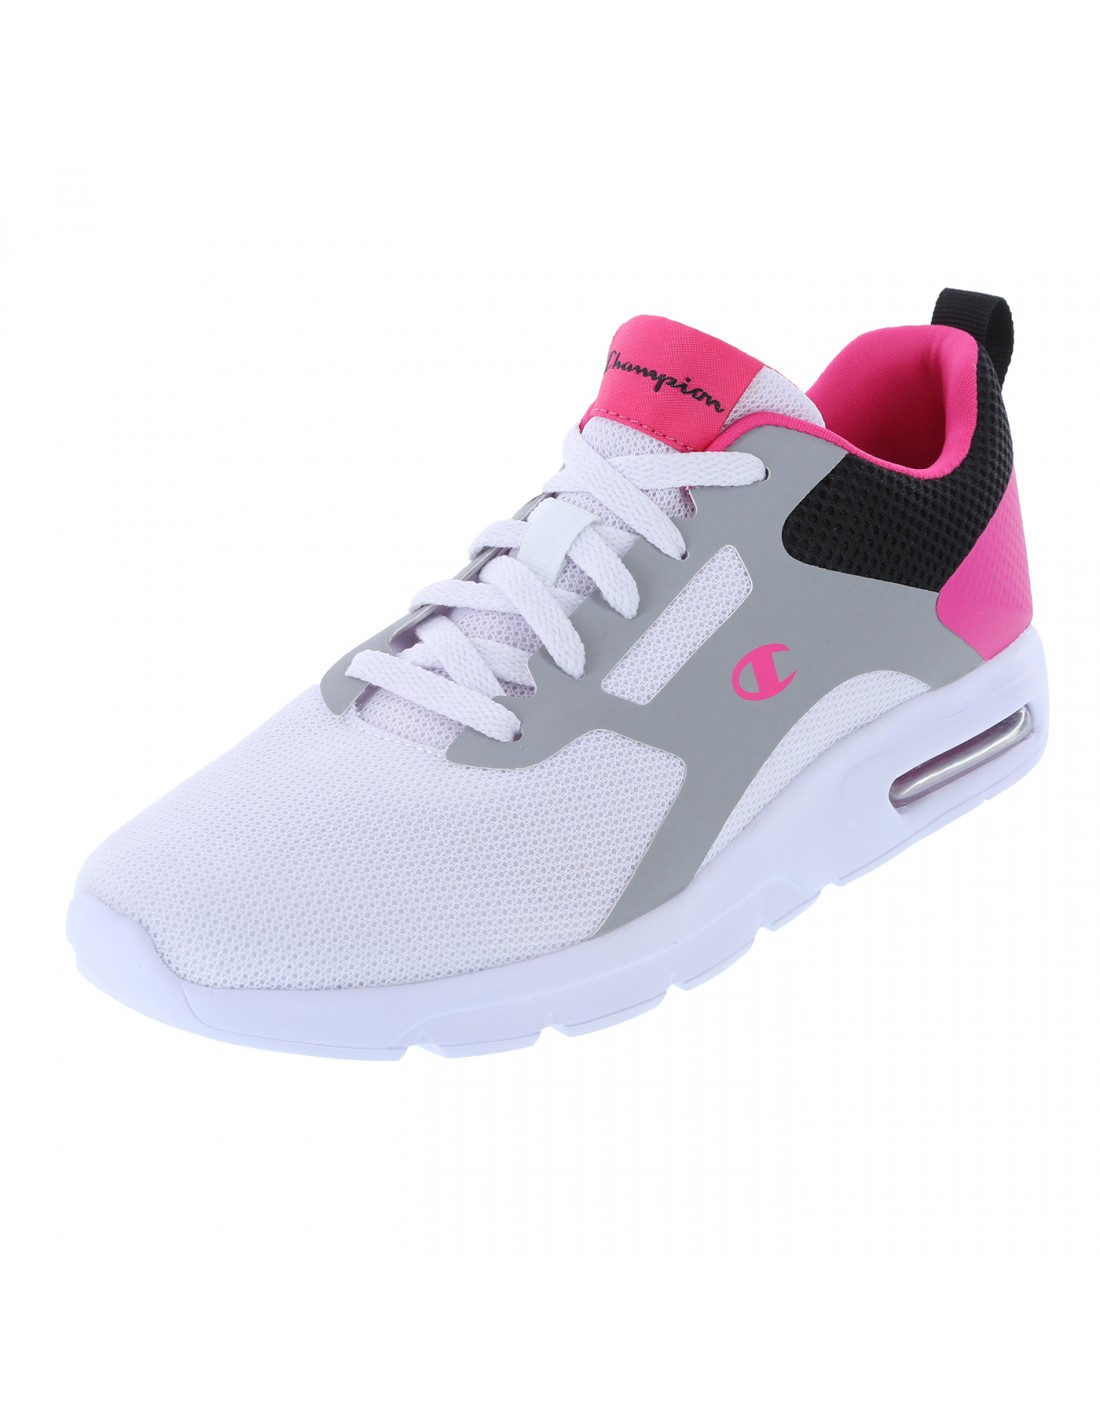 payless champion tennis shoes